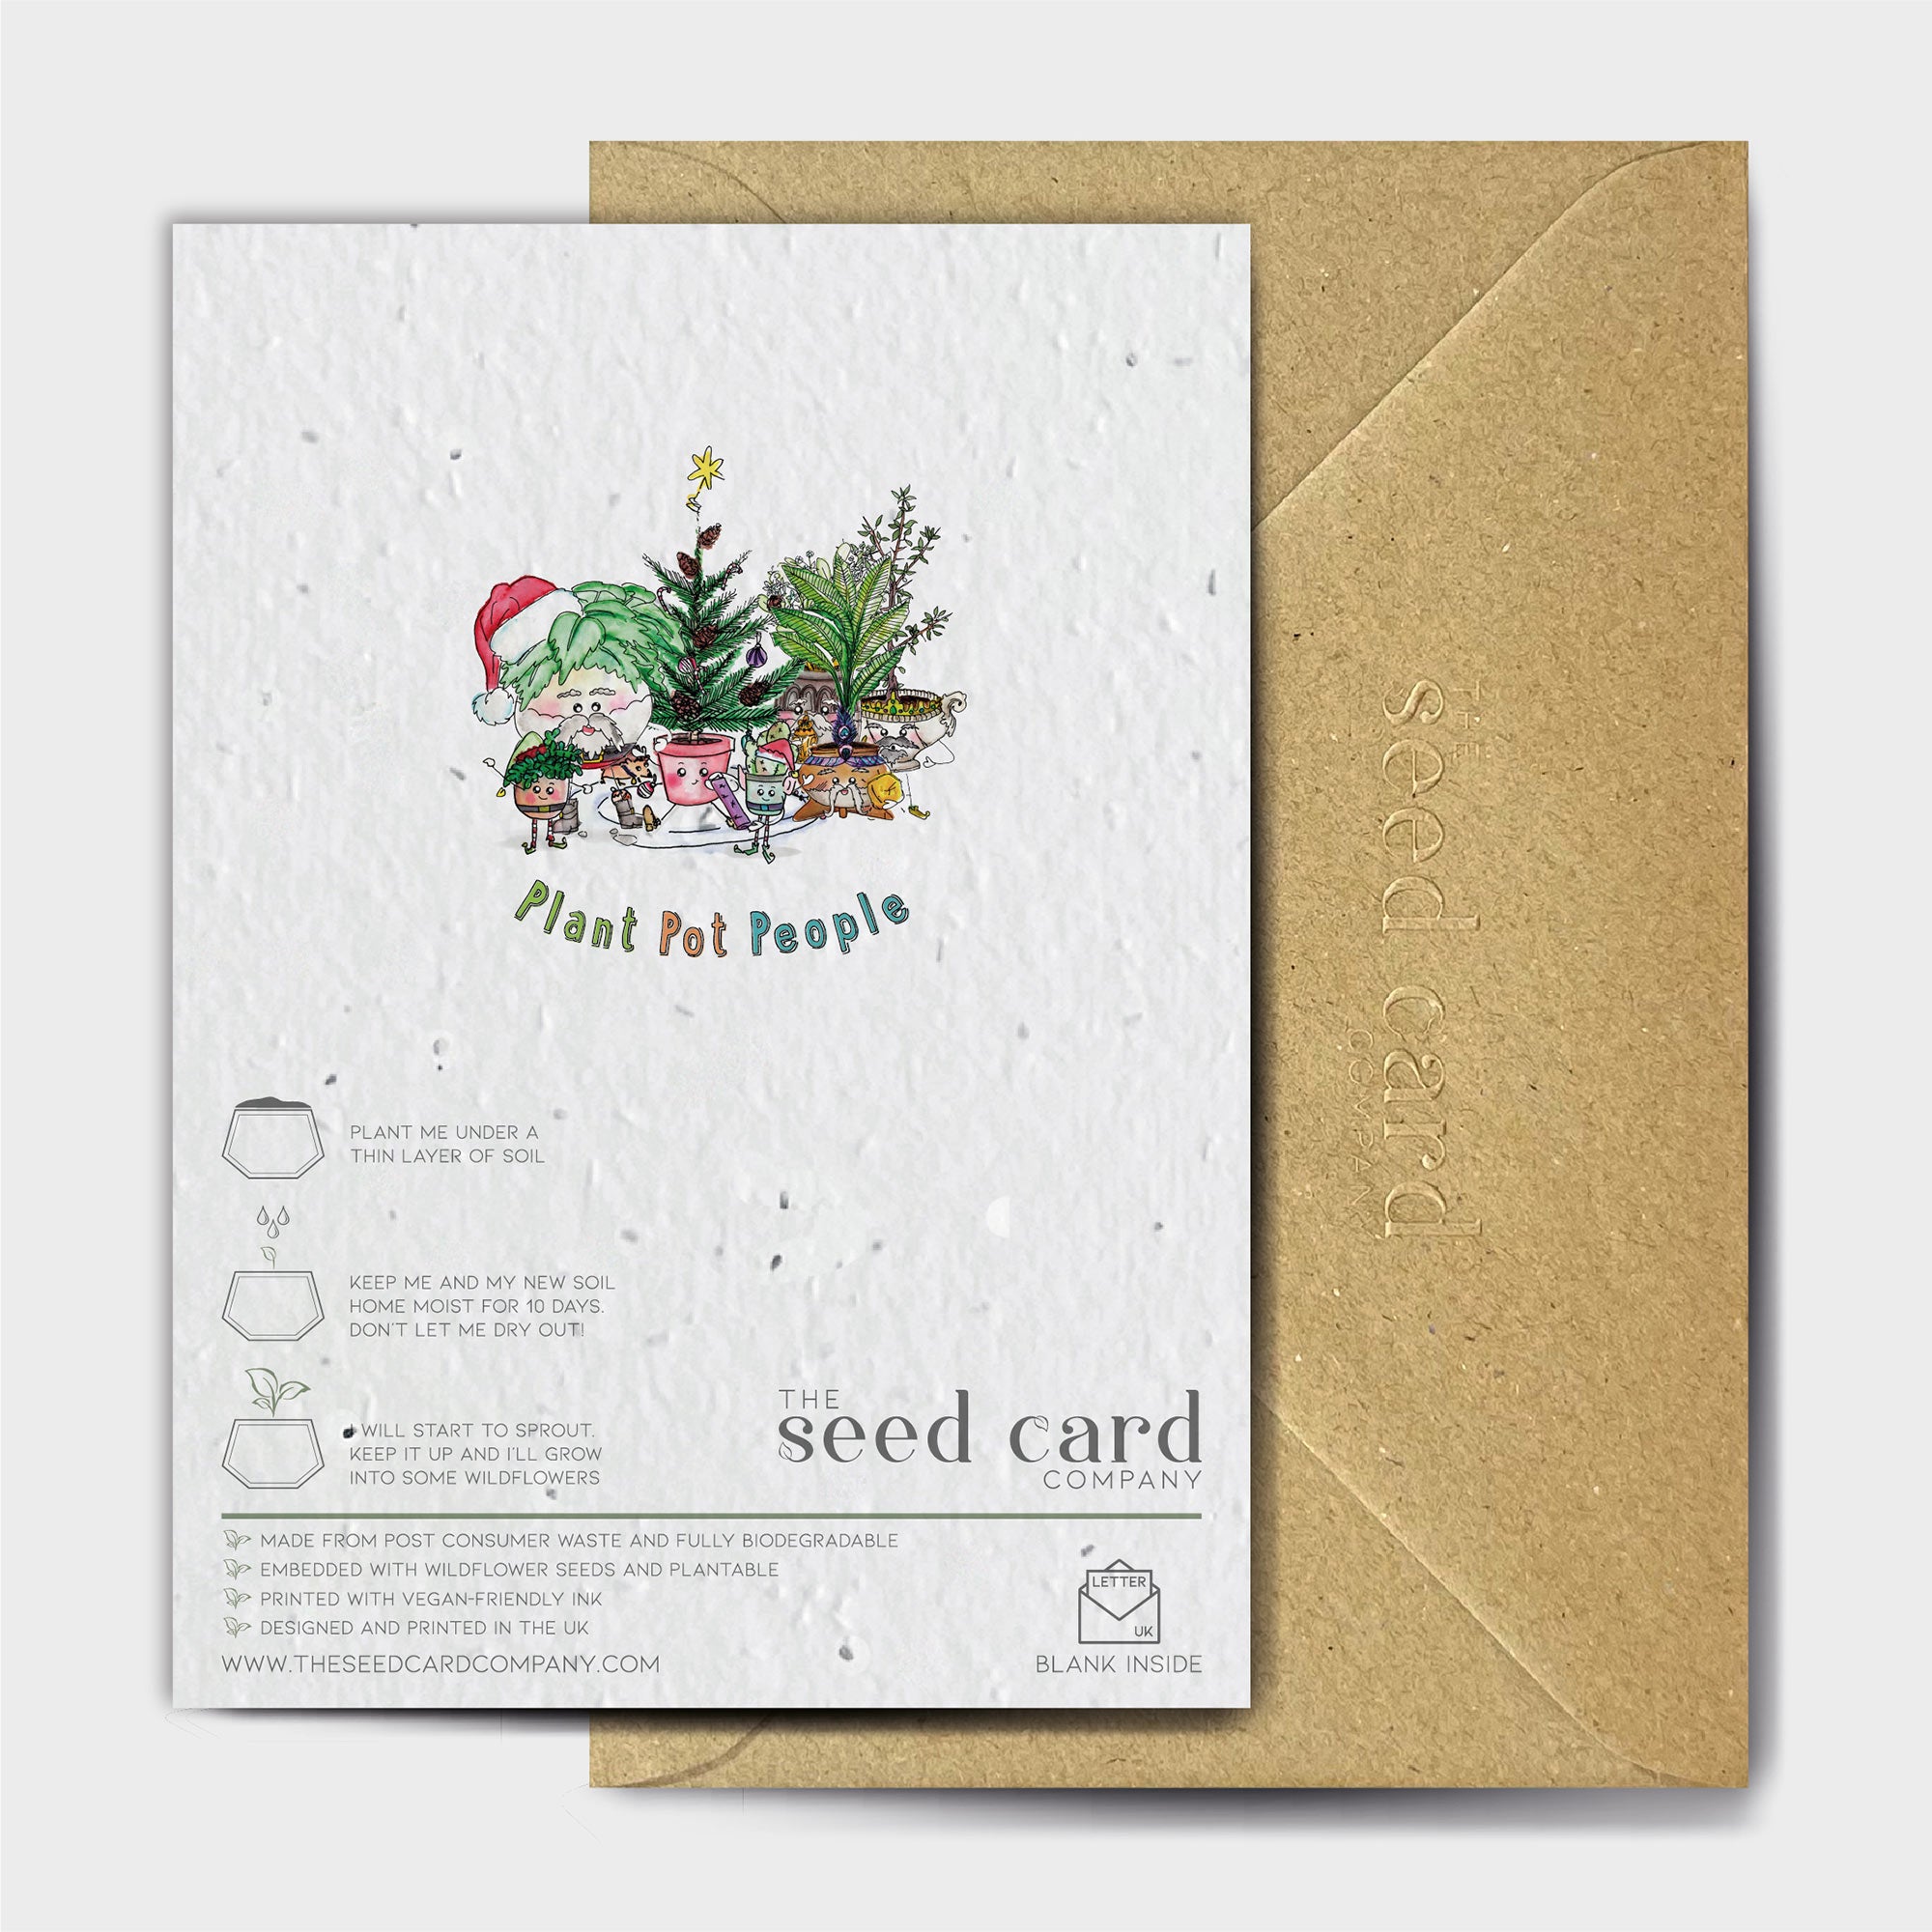 Shop online Wake Up, Queenie's On! - 100% biodegradable seed-embedded cards Shop -The Seed Card Company